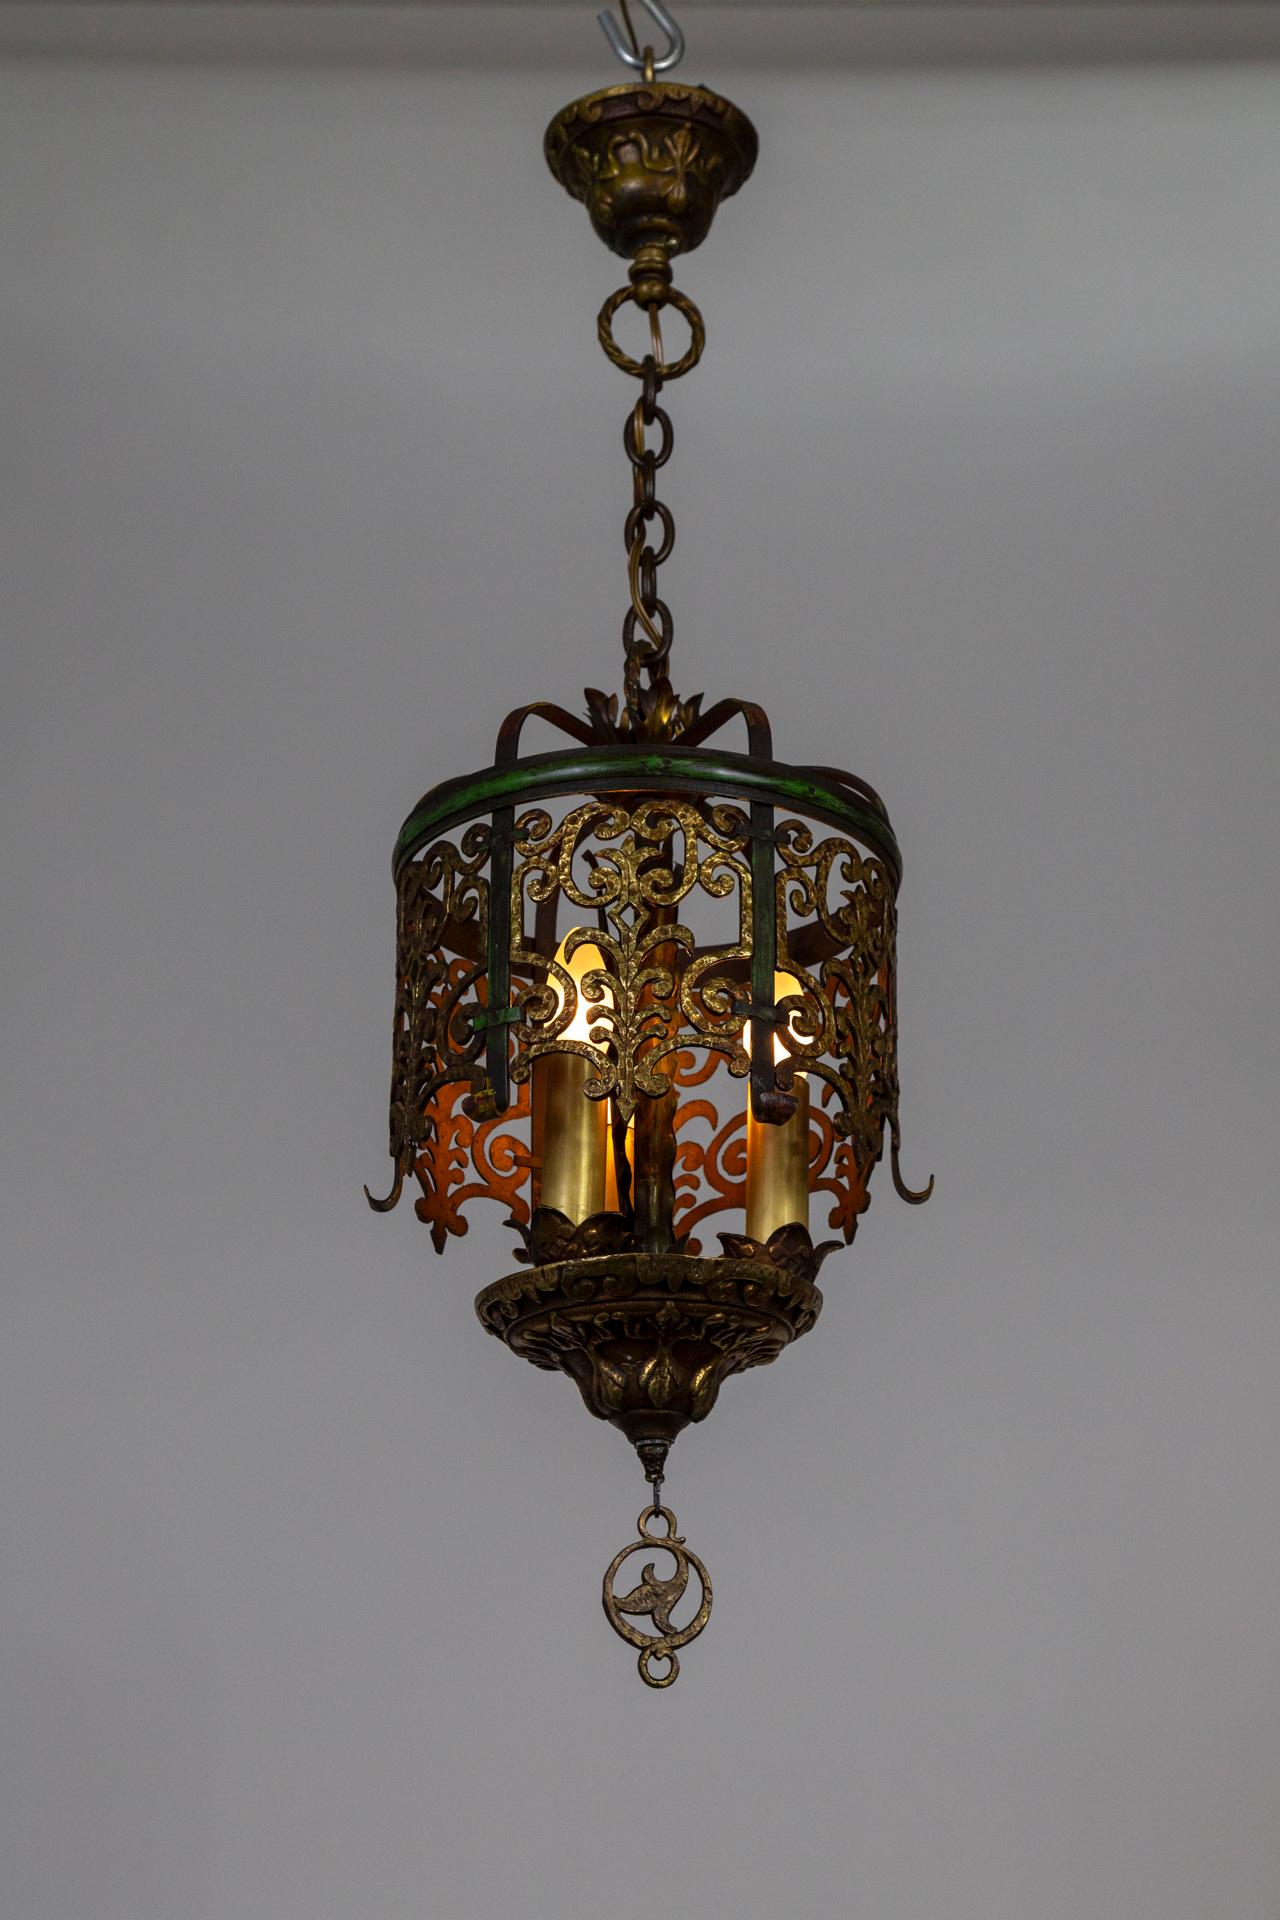 A unique, Medieval Revival chandelier with a touch of 1920s Nouveau. The structure has a rich, antique brass tone with green and red accents. Nicely proportioned, with detailed, heavy, casted canopy and bottom bowl. Three candlestick lights (medium